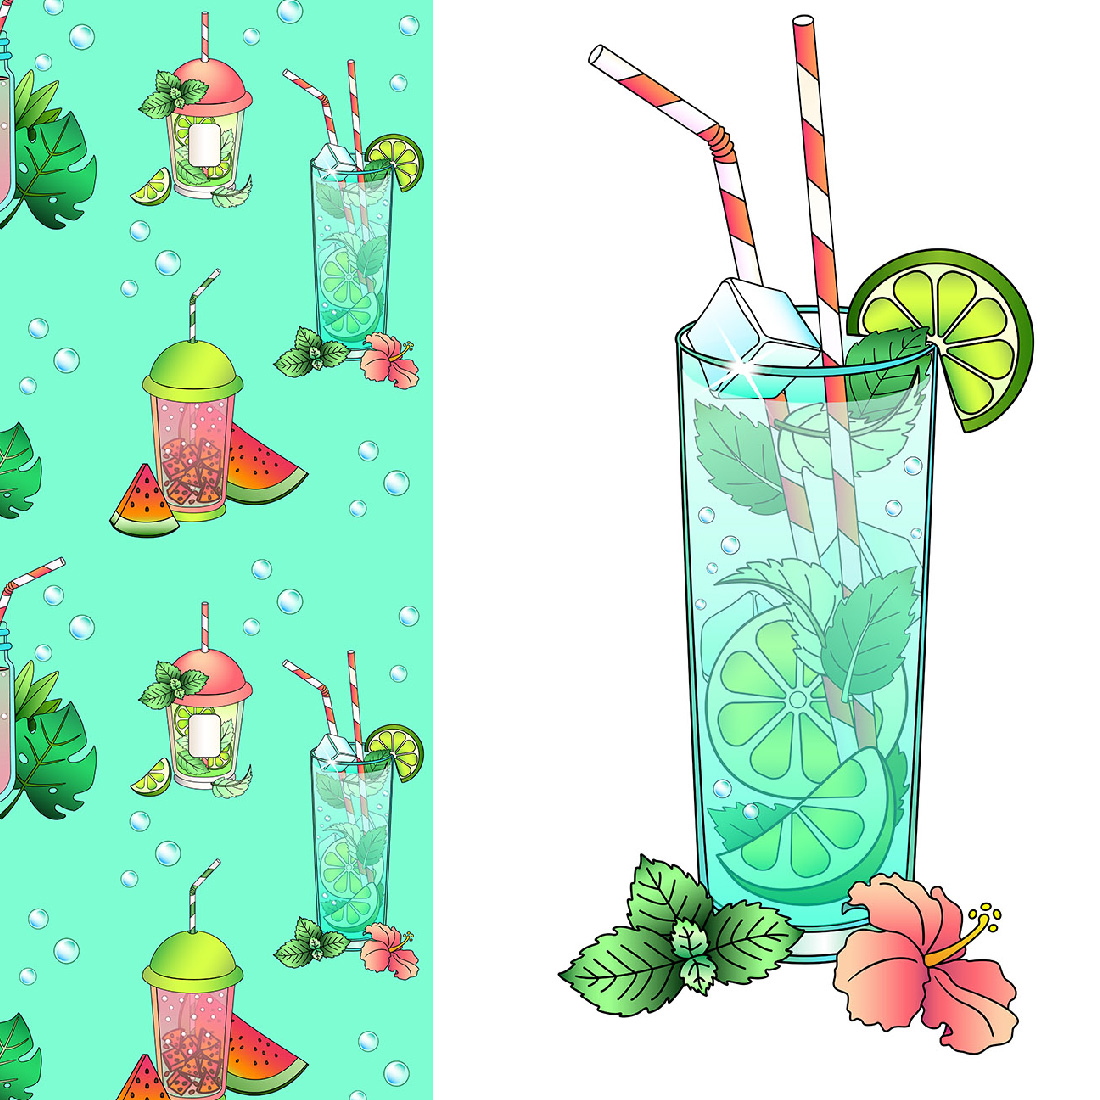 Drawing of a glass of water and a drawing of a drink.